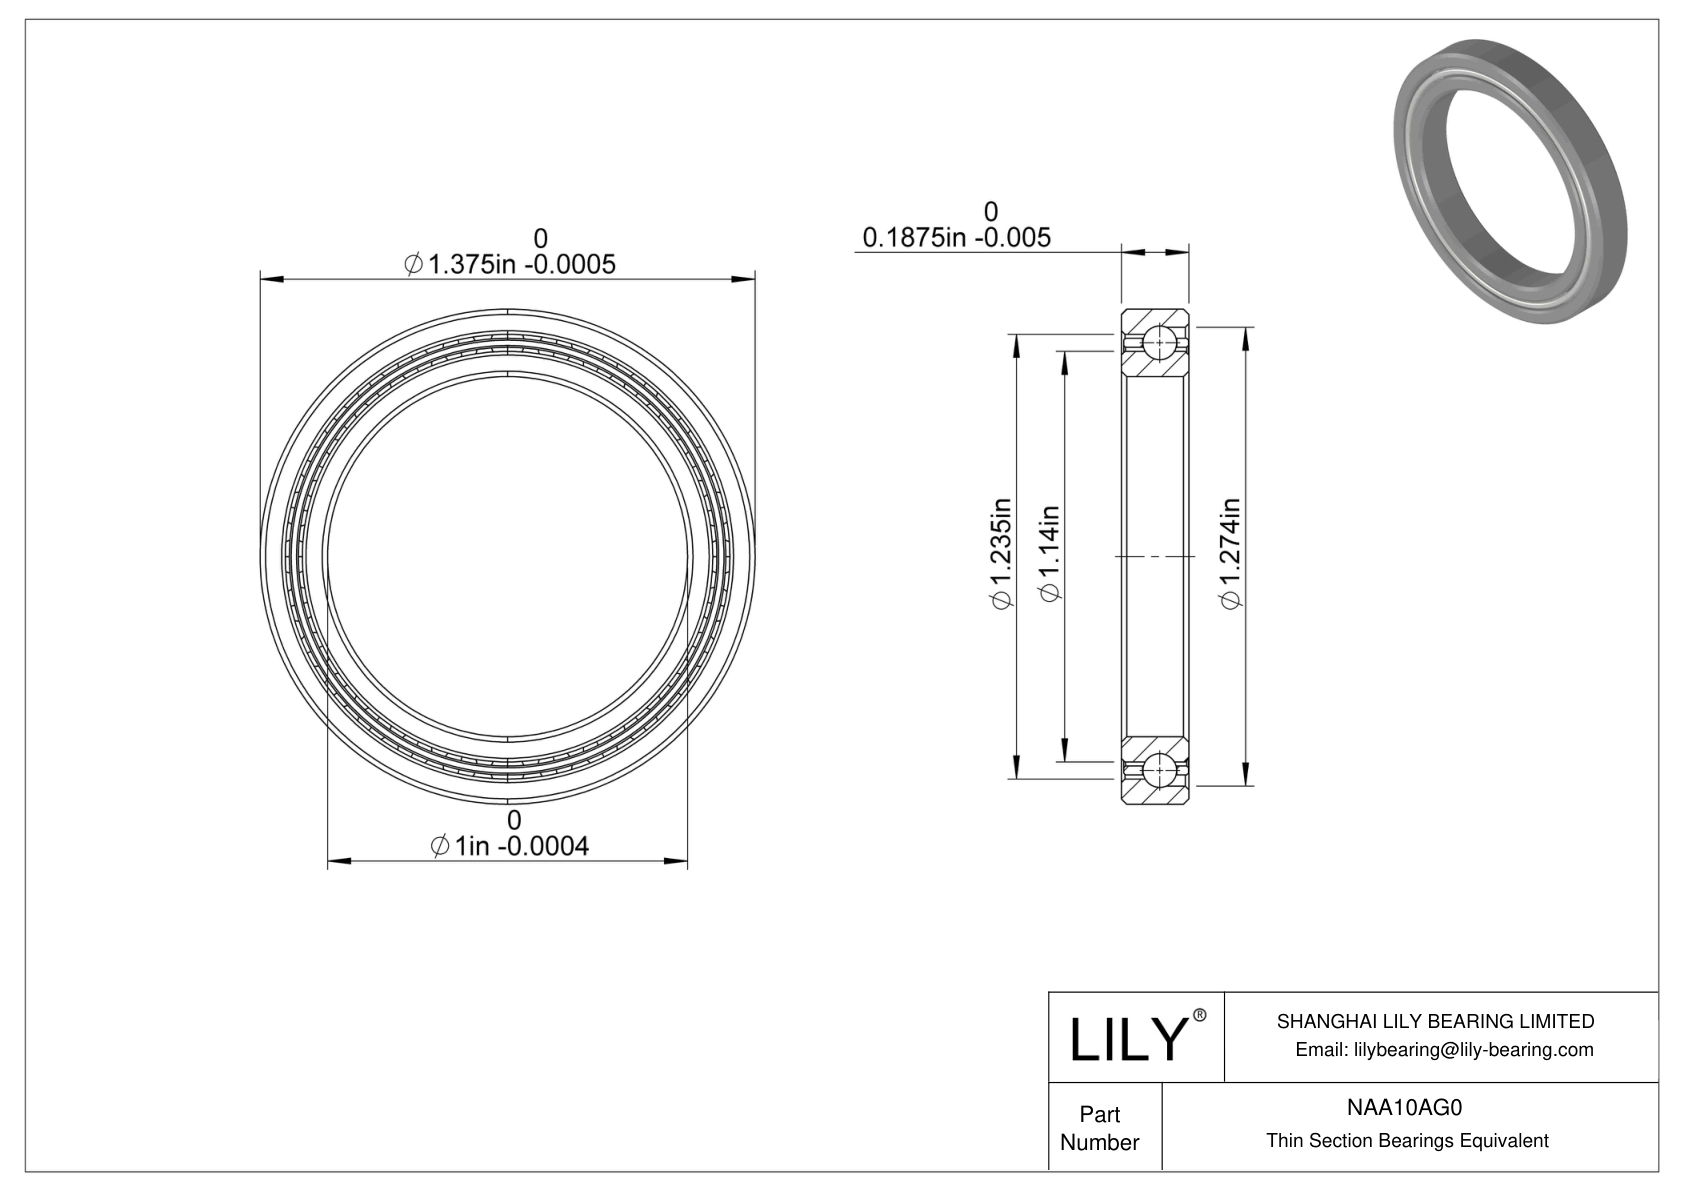 NAA10AG0 Constant Section (CS) Bearings cad drawing